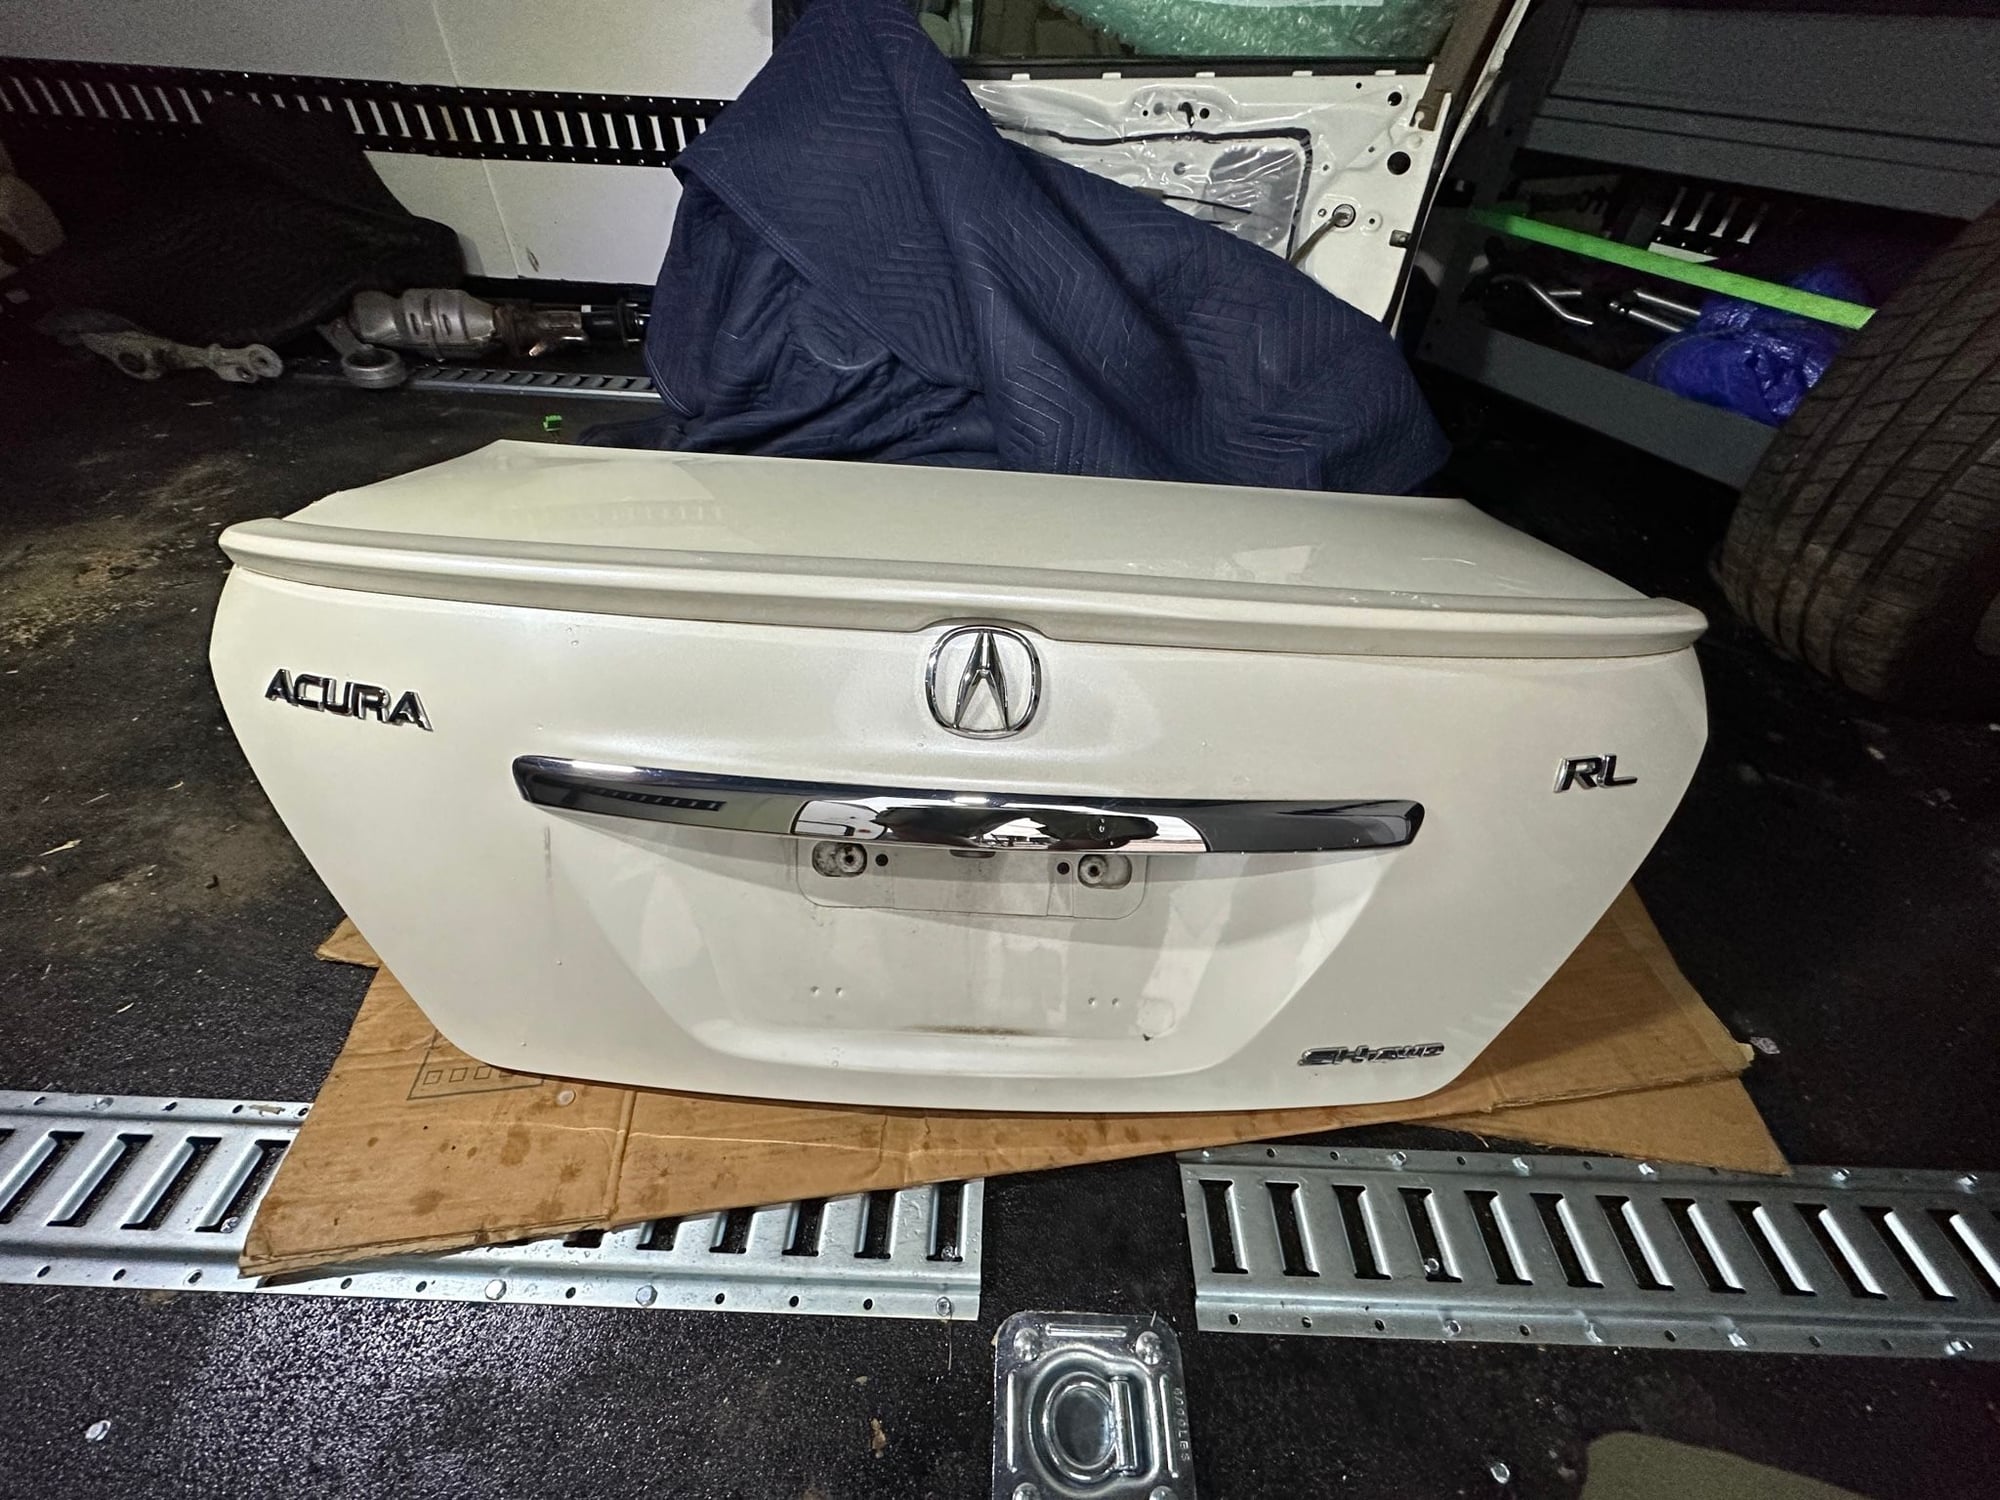 2006 Acura RL - TRUNK Complete - Accessories - $100 - Katy, TX 77494, United States